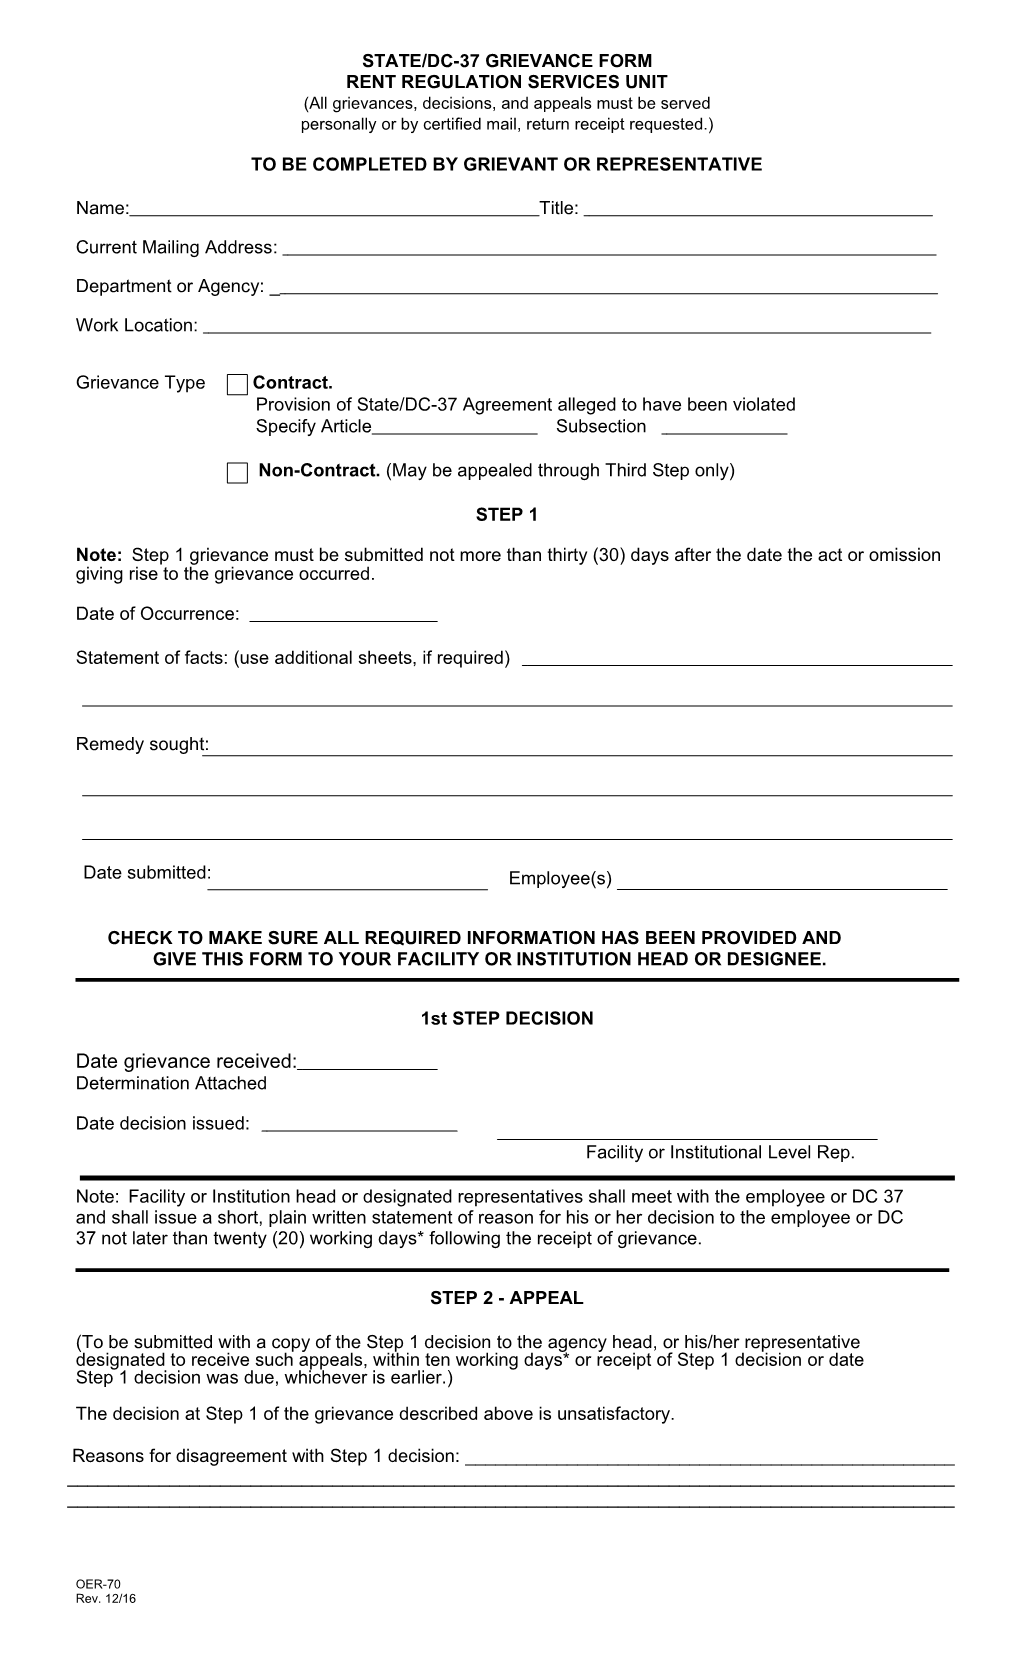 State/Dc-37 Grievance Form